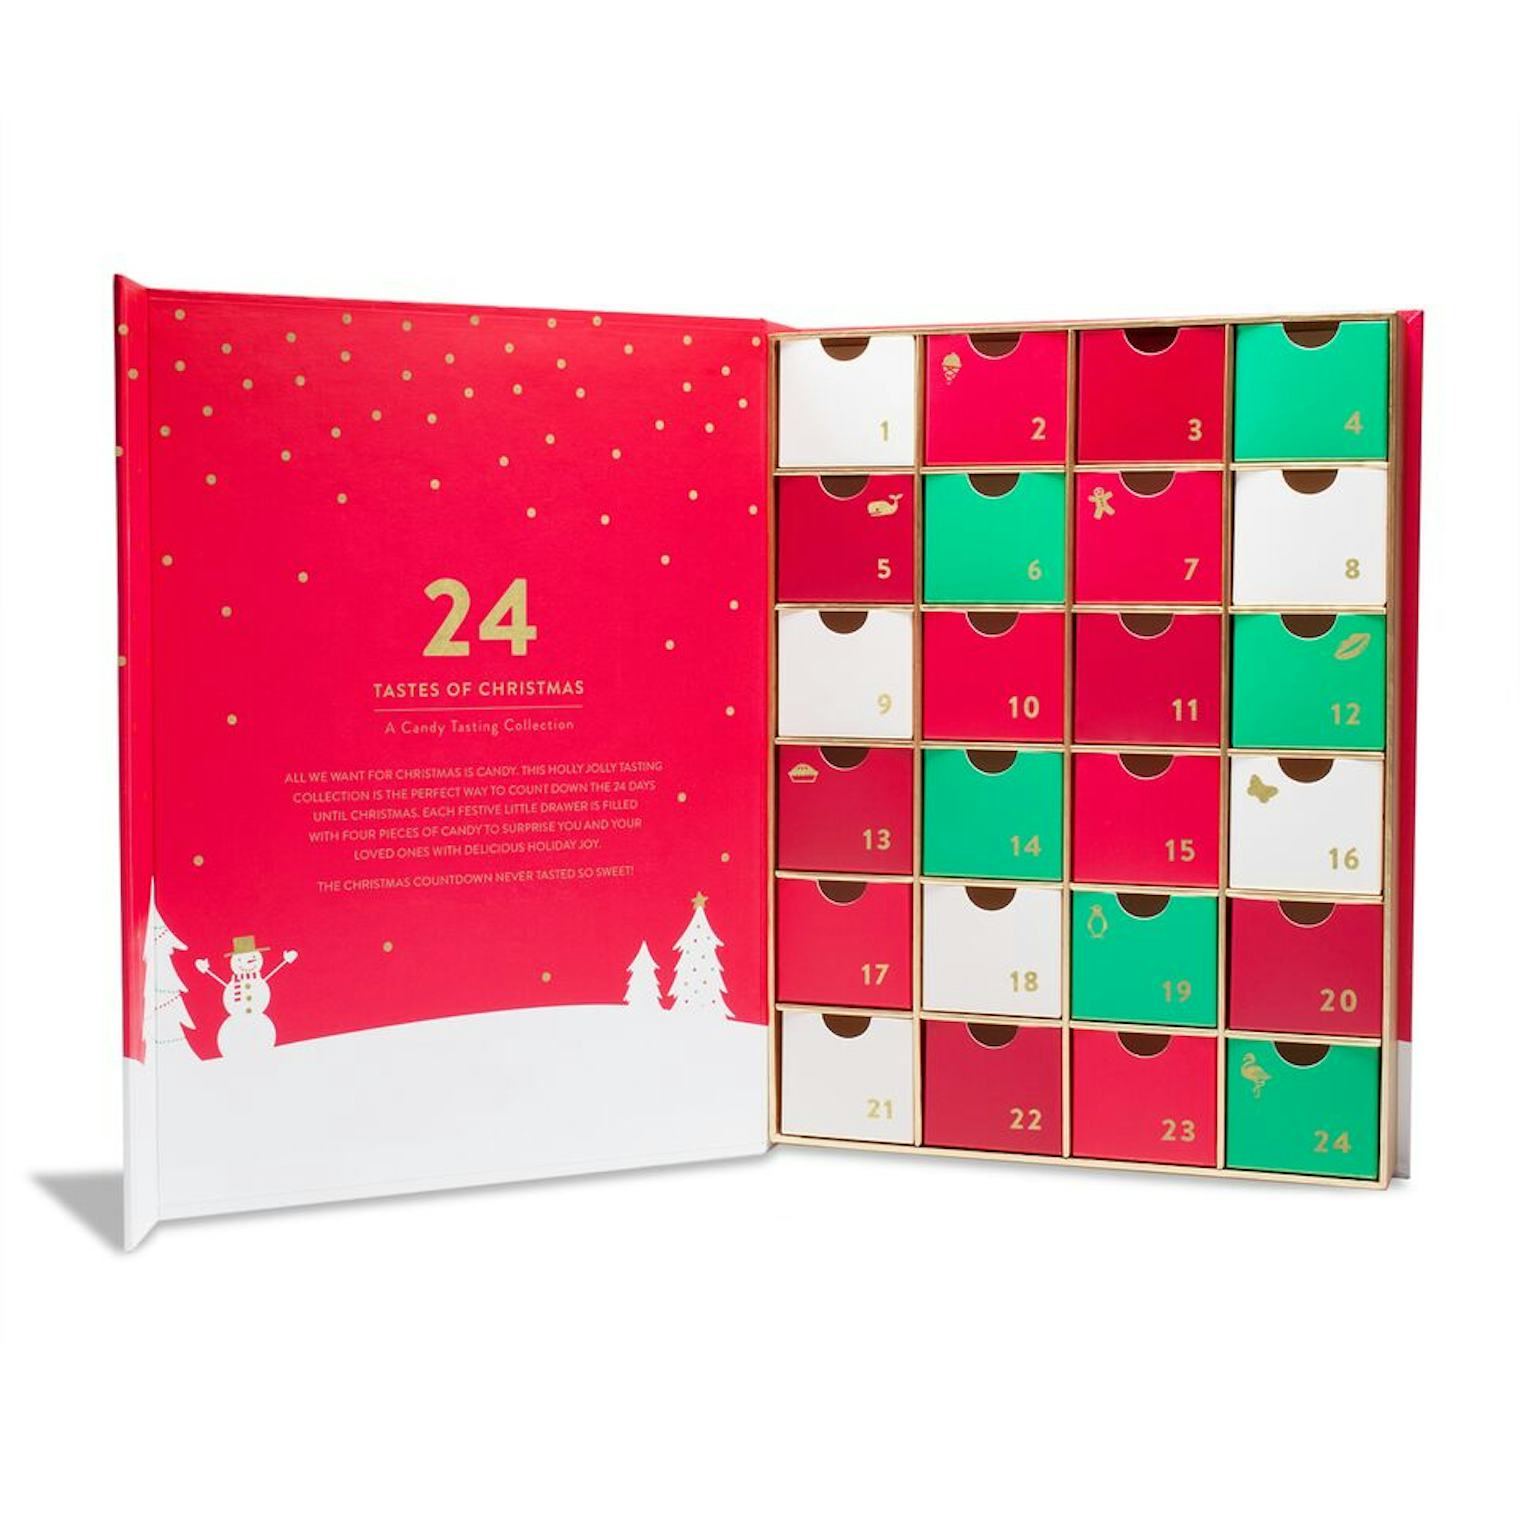 Sugarfina #39 s Advent Calendar For 2018 Features 24 Days Of Holiday